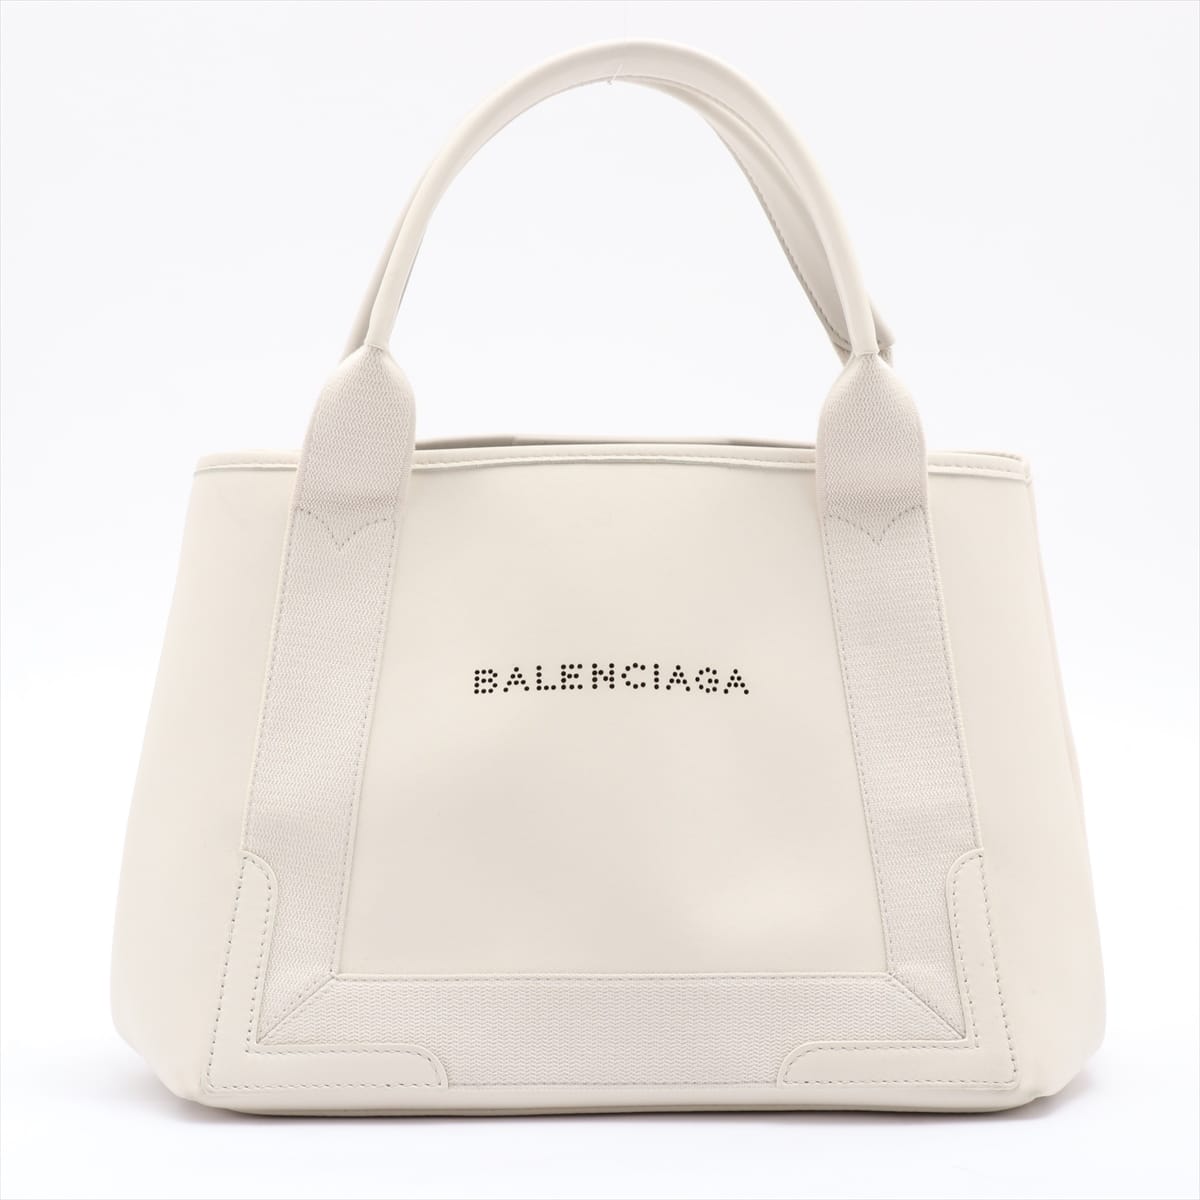 Balenciaga Navy cabas Leather Tote bag White 339933 with pouch